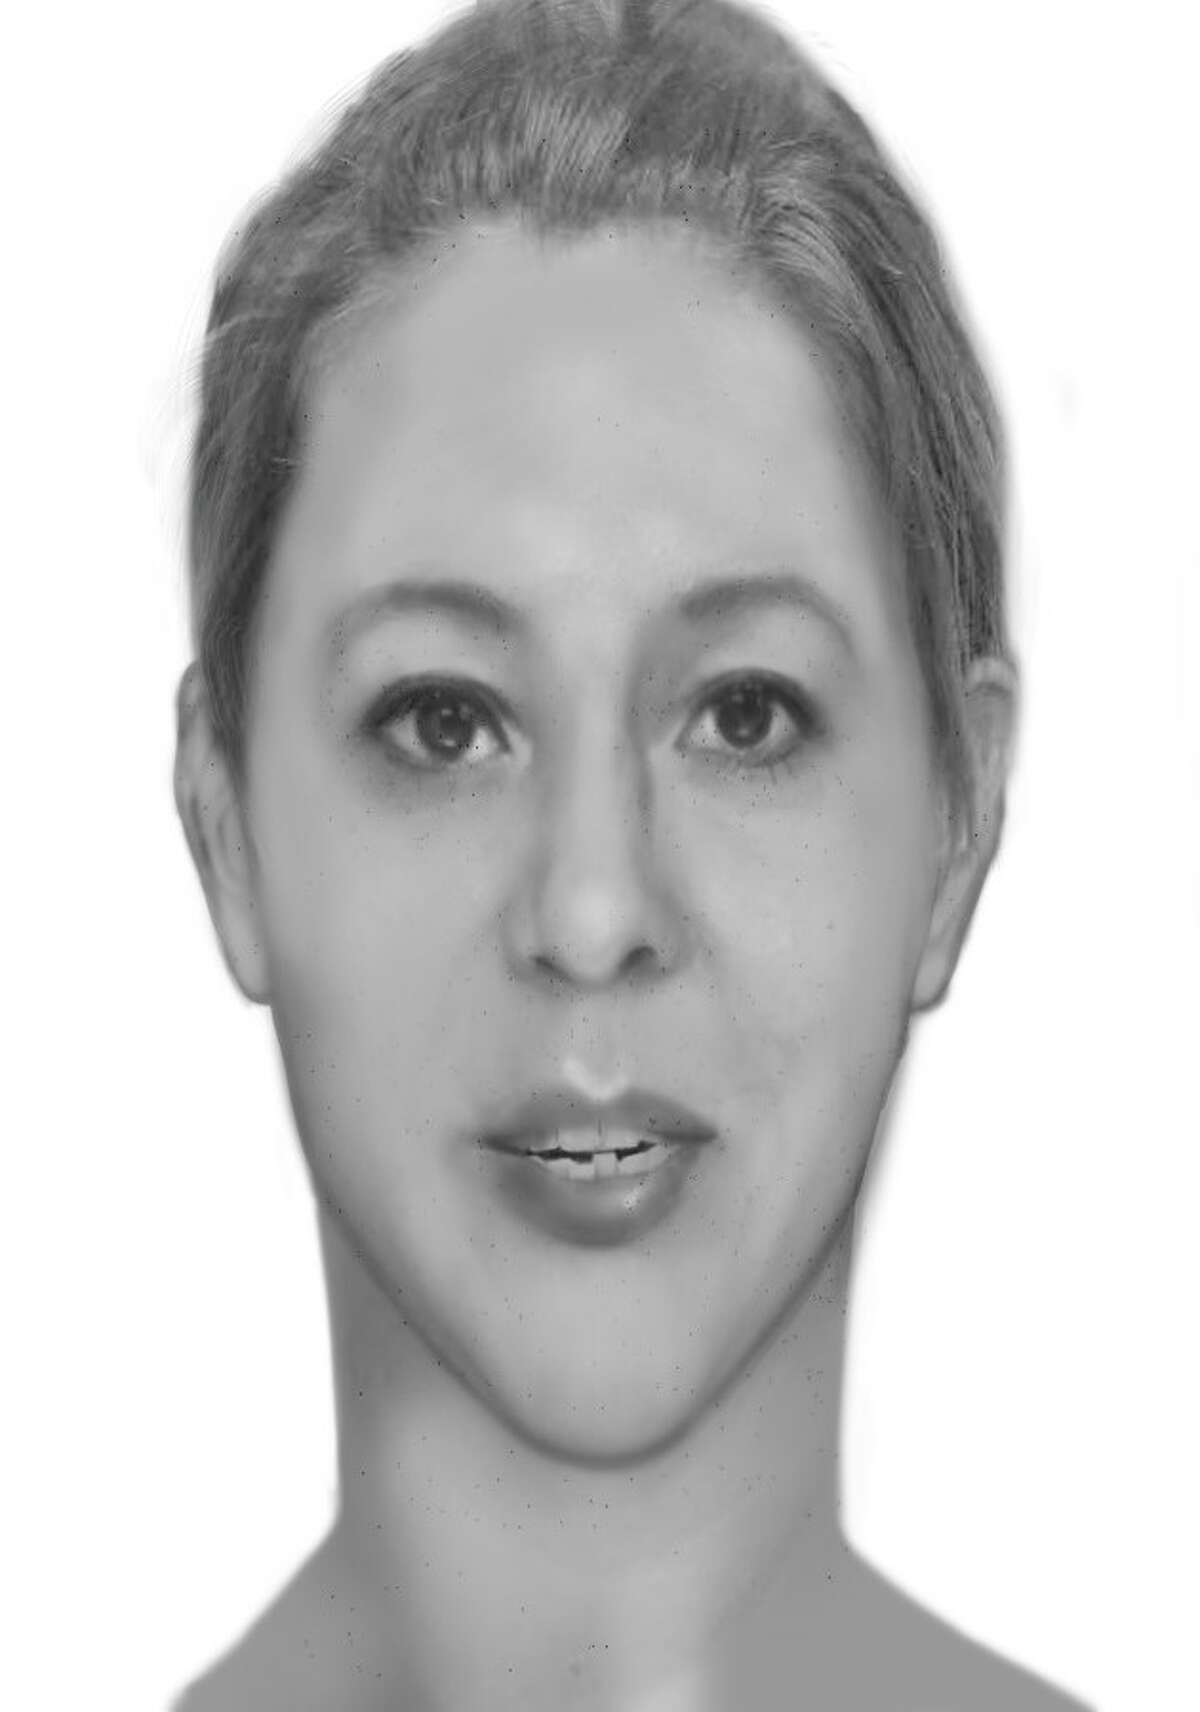 On Wednesday, June 5, 2019, the Bexar County Sheriff's Office released a postmortem sketch of a woman whose remains were found near Government Canyon Natural Area on April 4, 2019.